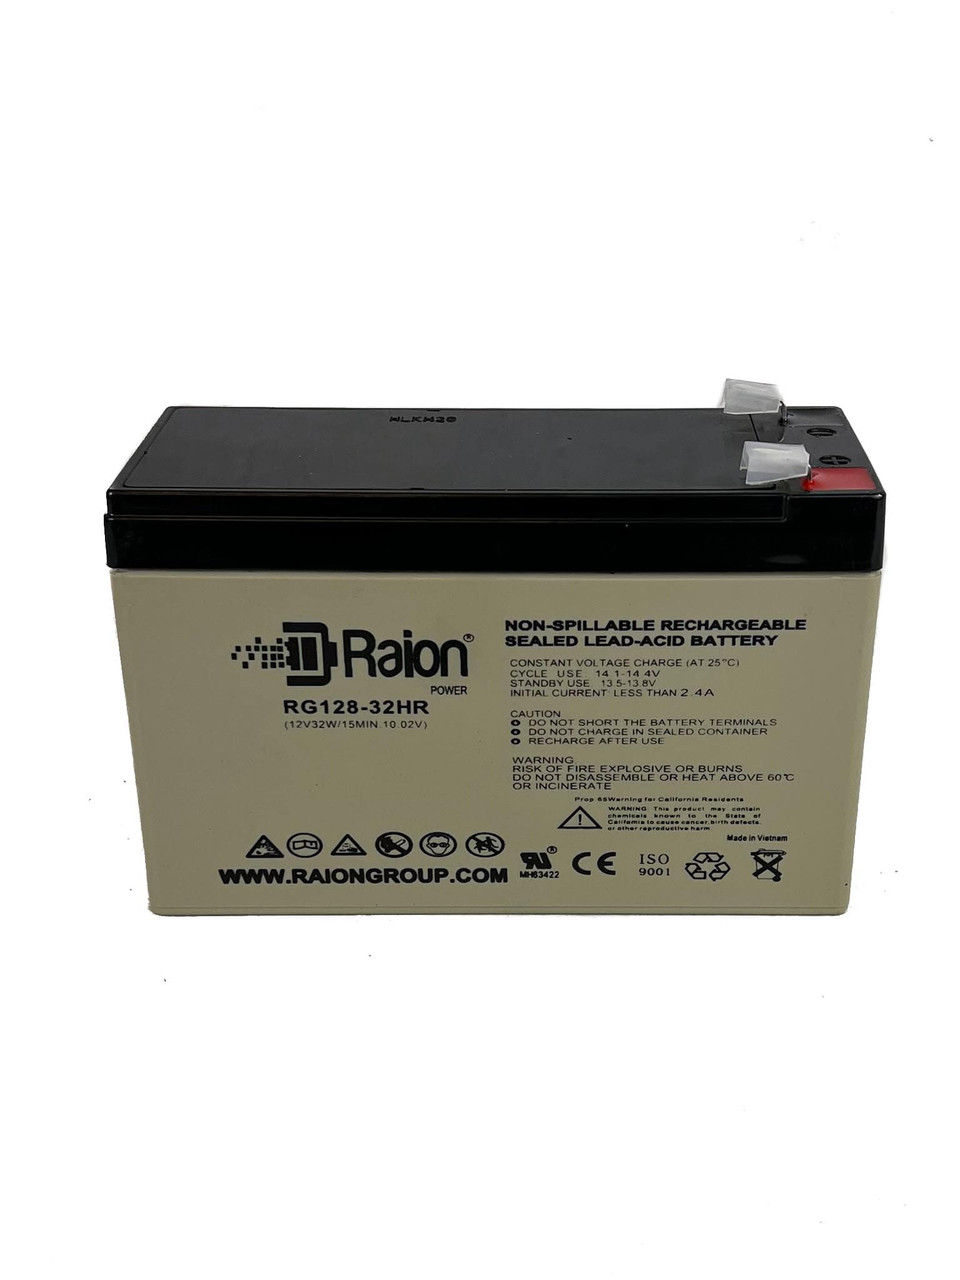 Raion Power RG128-32HR Replacement High Rate Battery Cartridge for APC PowerShield 24W 12VDC CP24U12NA3-F2